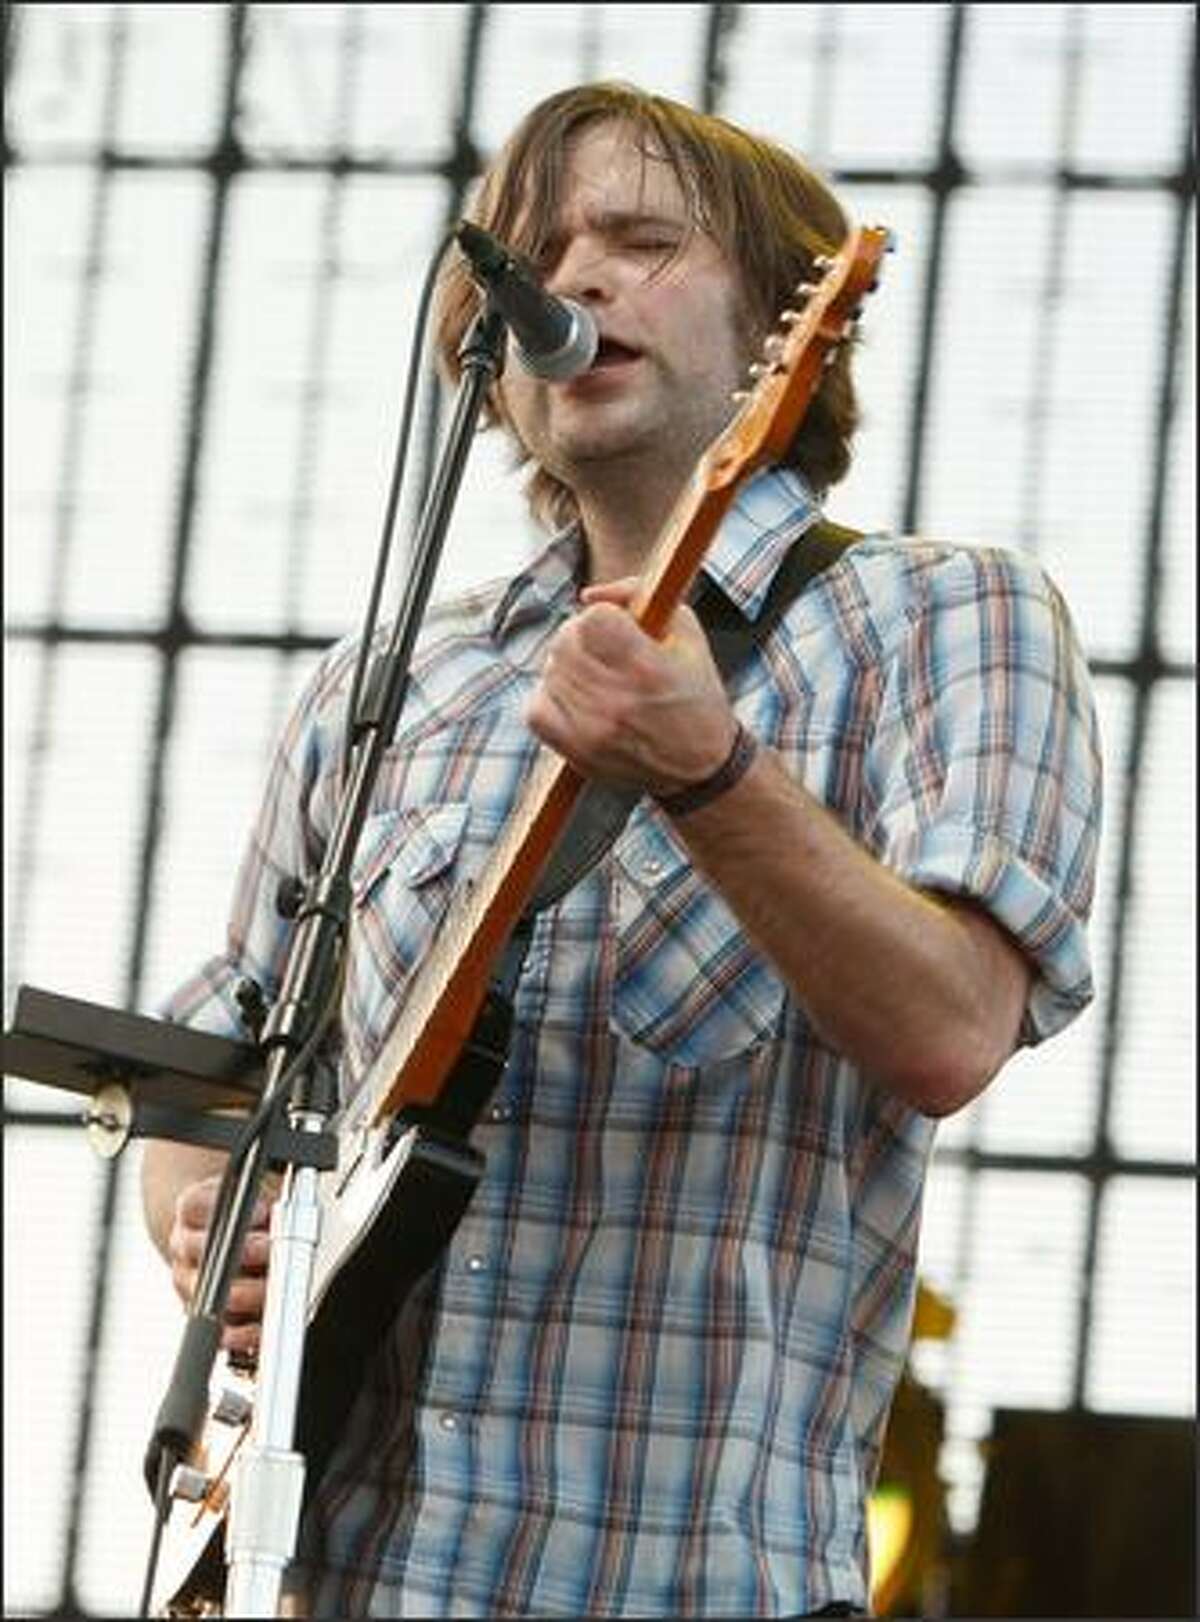 INDIO, CA - APRIL 26: Musician Ben Gibbard from the band Death Cab for Cutie performs during day 2 of the Coachella Valley Music And Arts Festival held at the Empire Polo Field on April 26, 2008 in Indio, California.